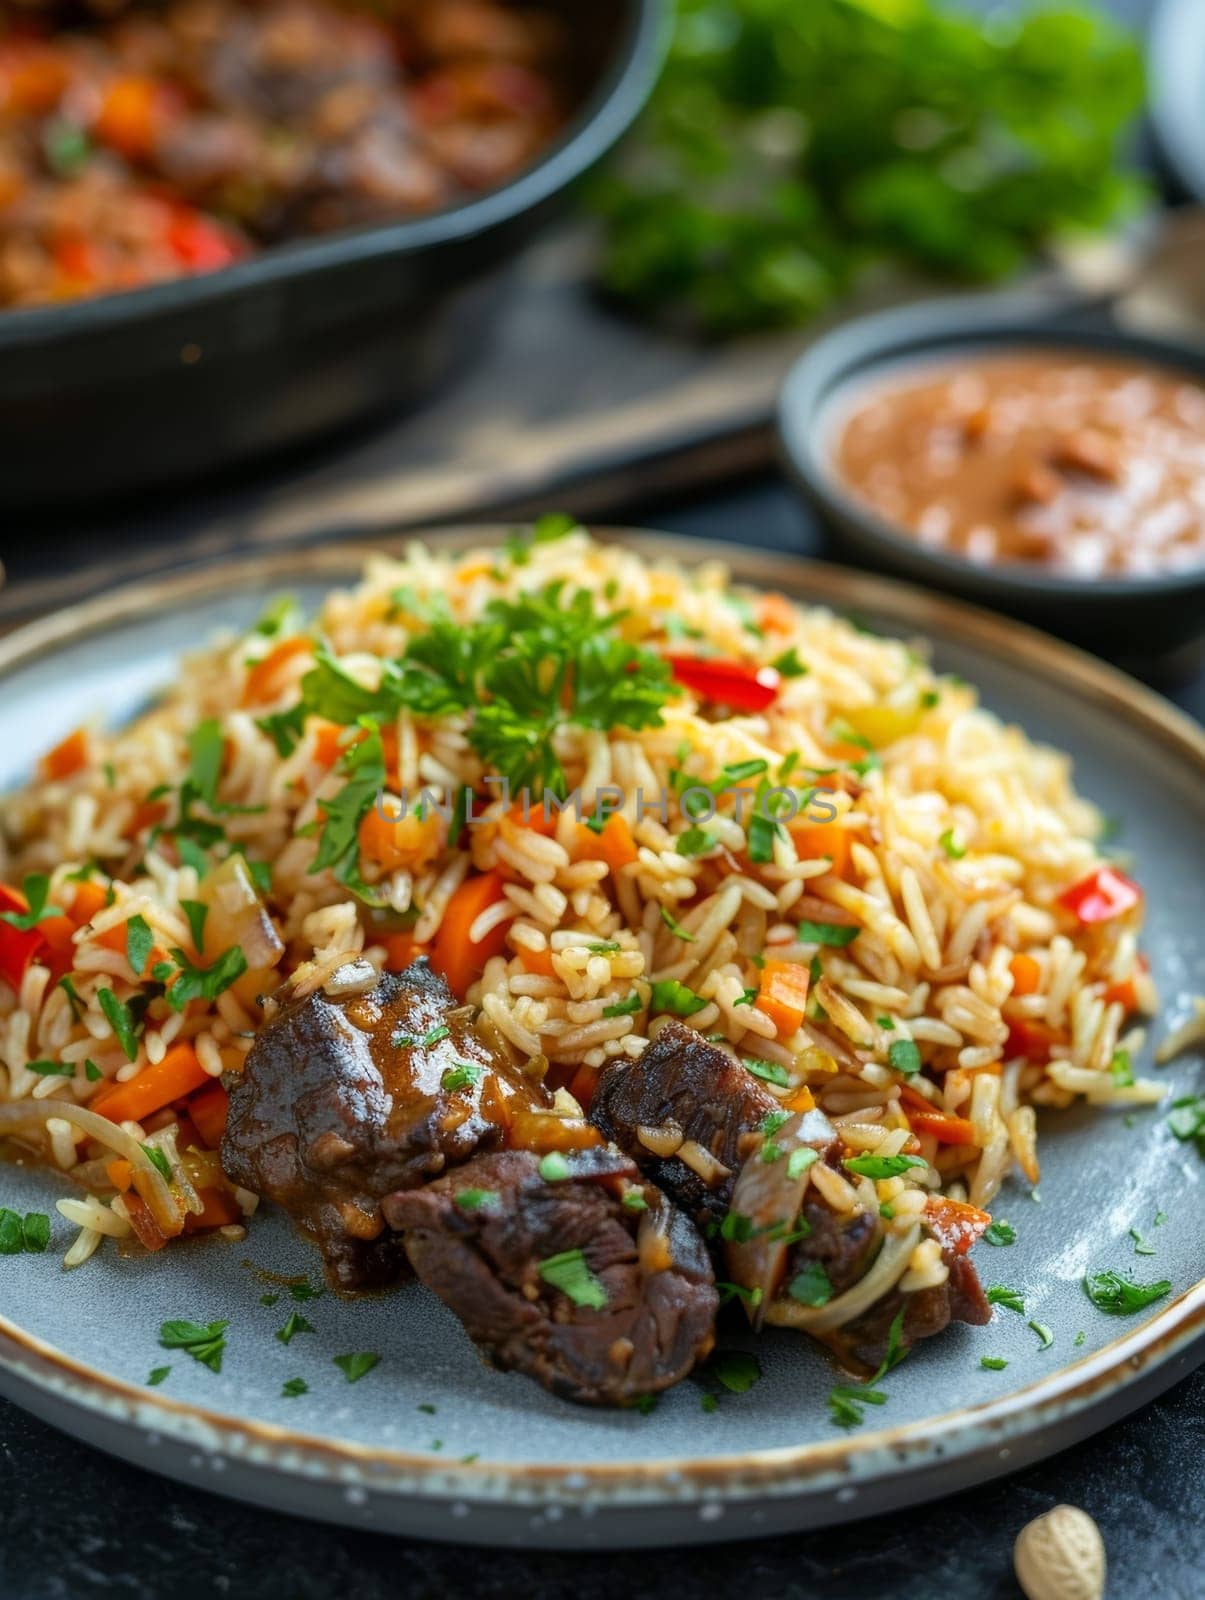 Zimbabwean peanut butter rice, a traditional dish featuring rice cooked with creamy peanut butter, served alongside flavorful meat stew. A taste of authentic African cuisine